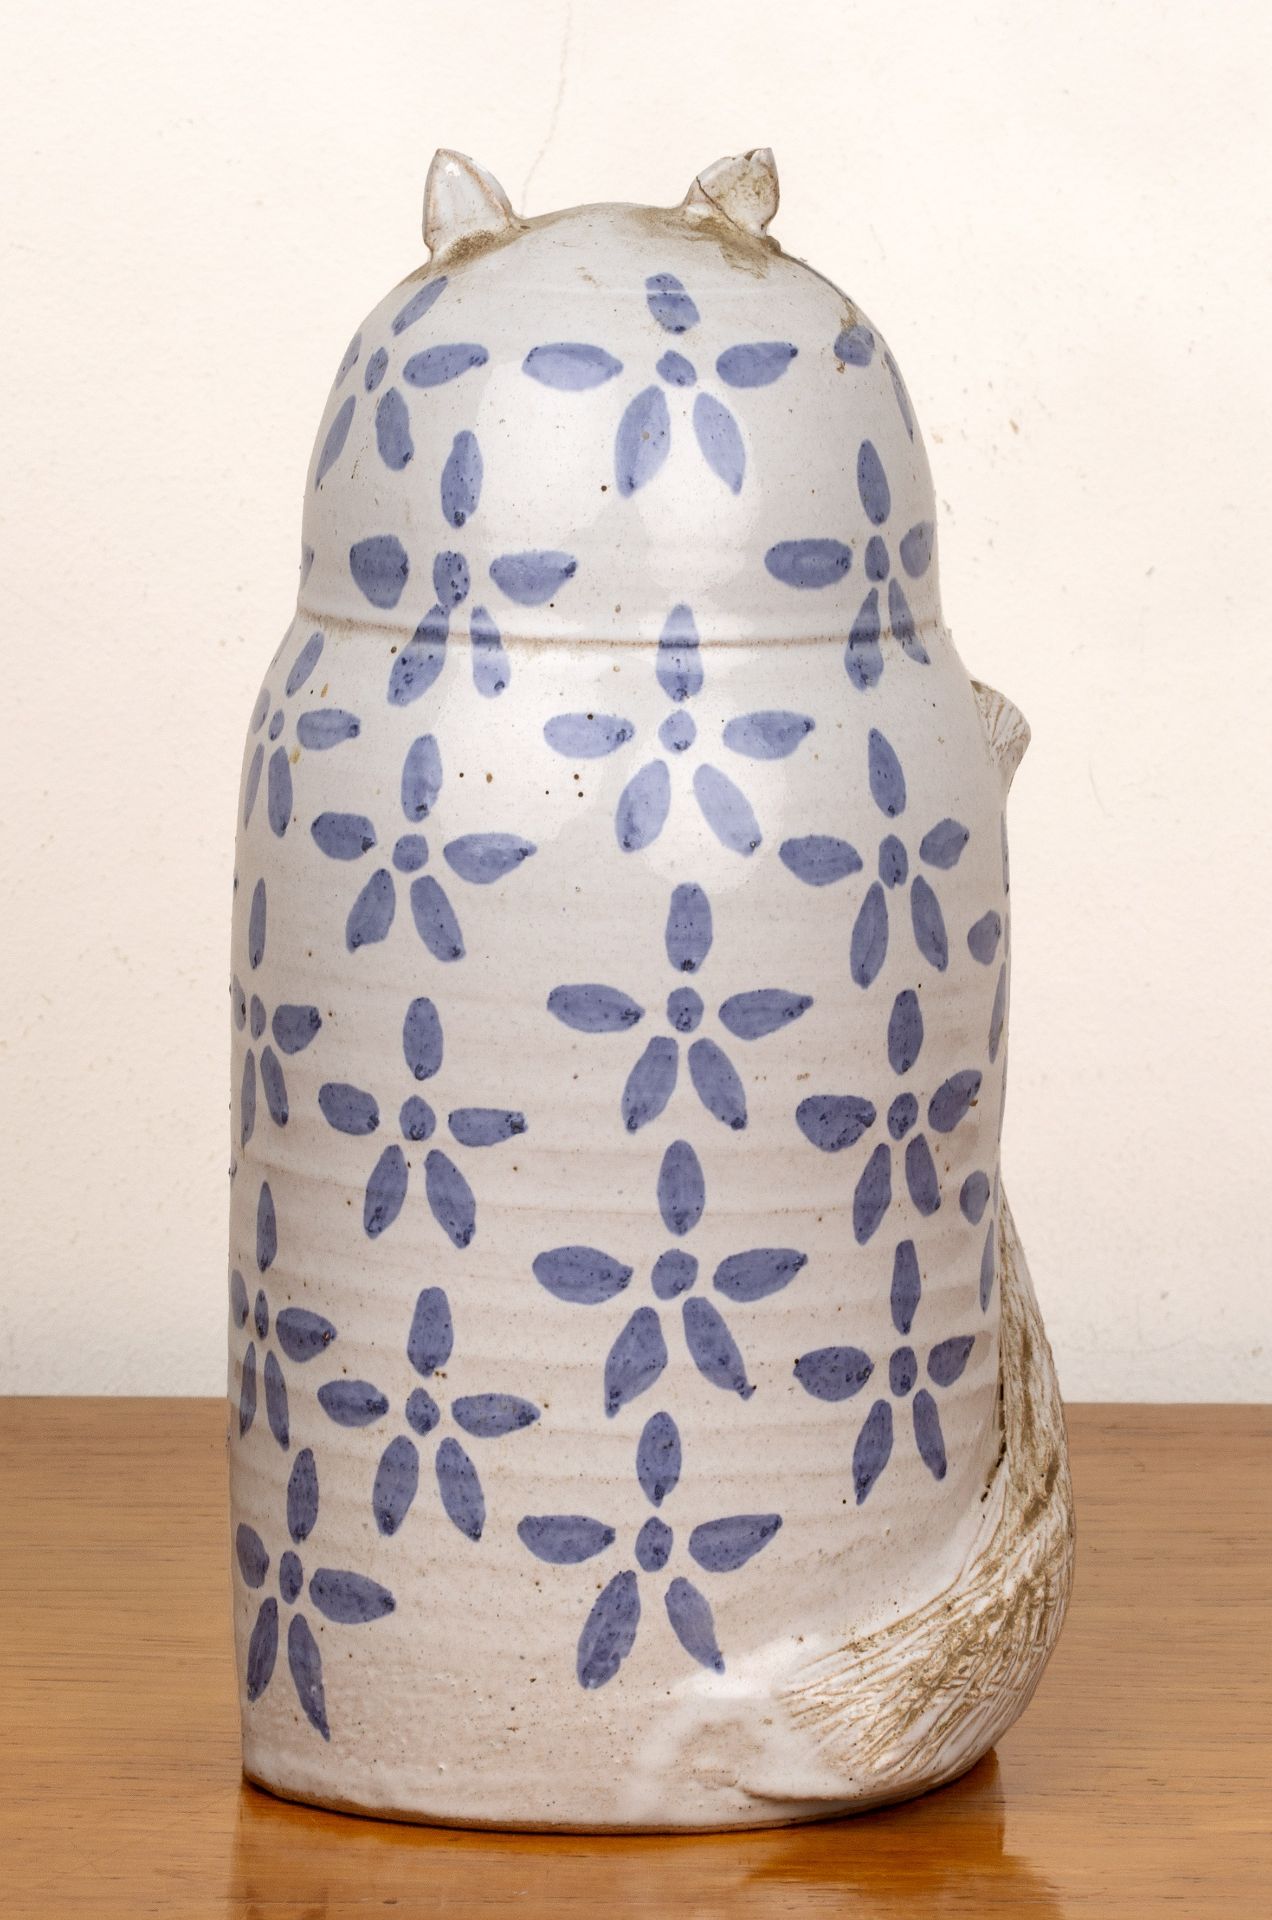 Thom Borthwick at Burnham Pottery studio pottery cat, with blue painted decoration, incised - Image 4 of 6